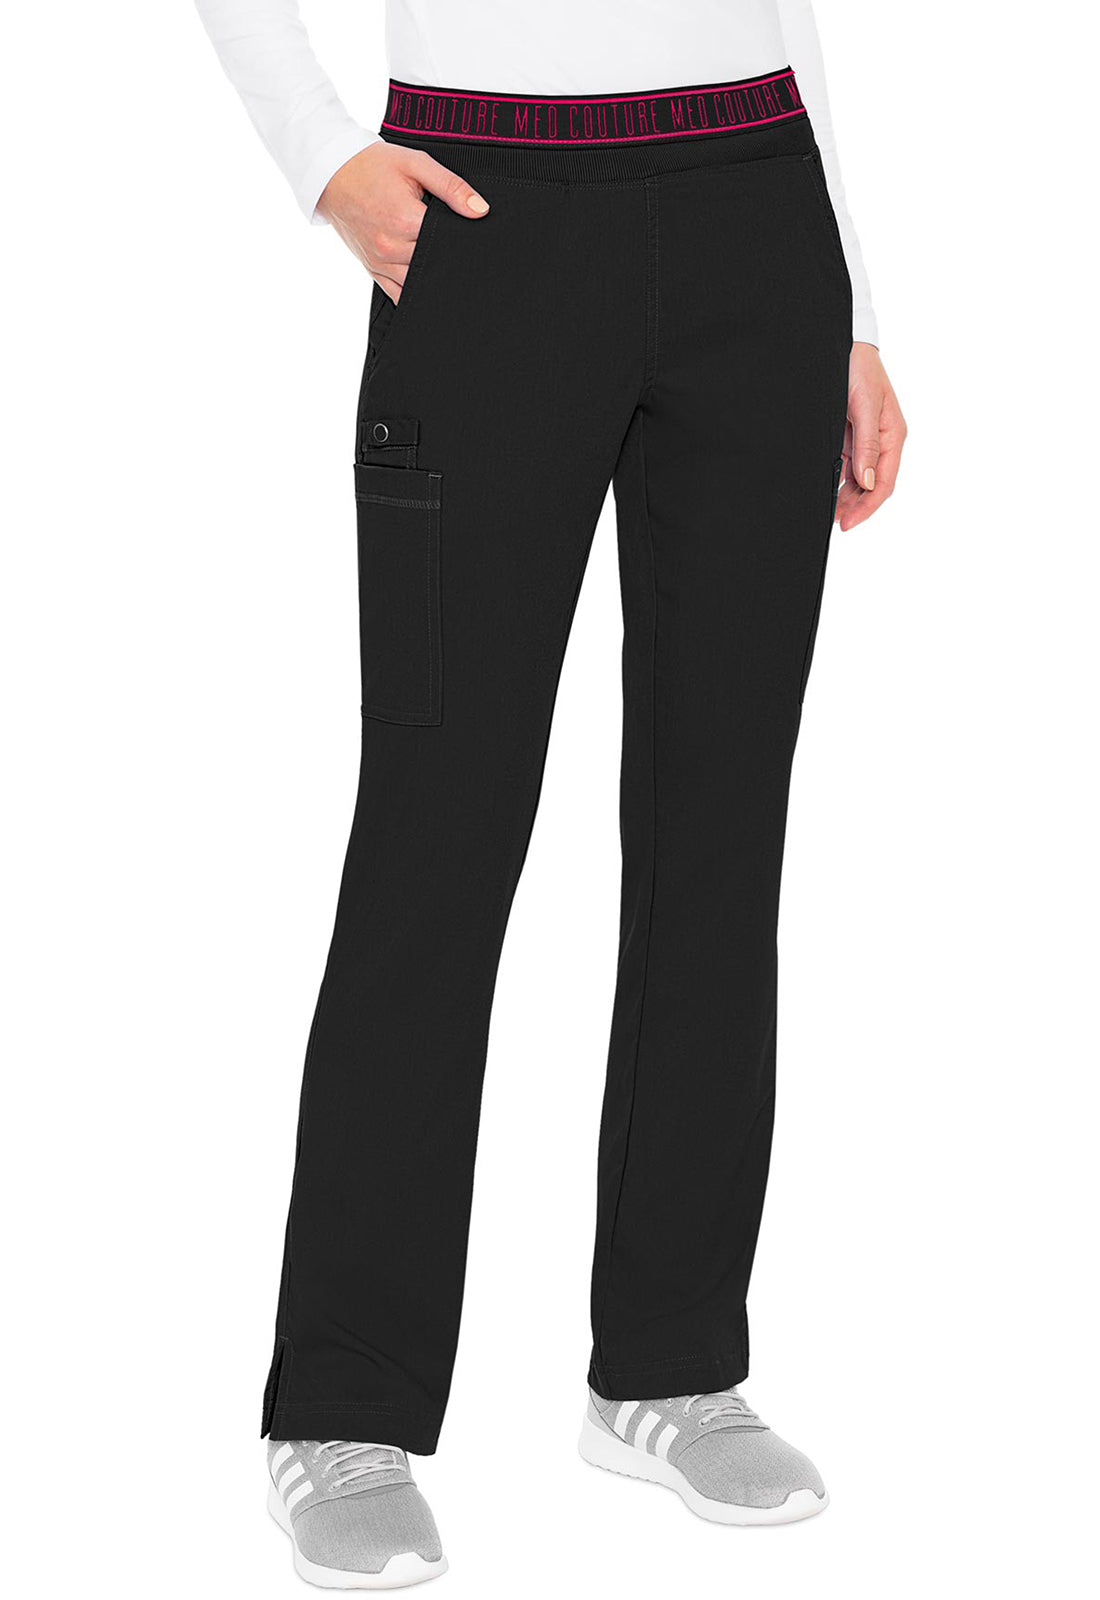 Med Couture Touch Yoga 2 Cargo Pocket Pant (16 Colors XS-2XL Petite Length)